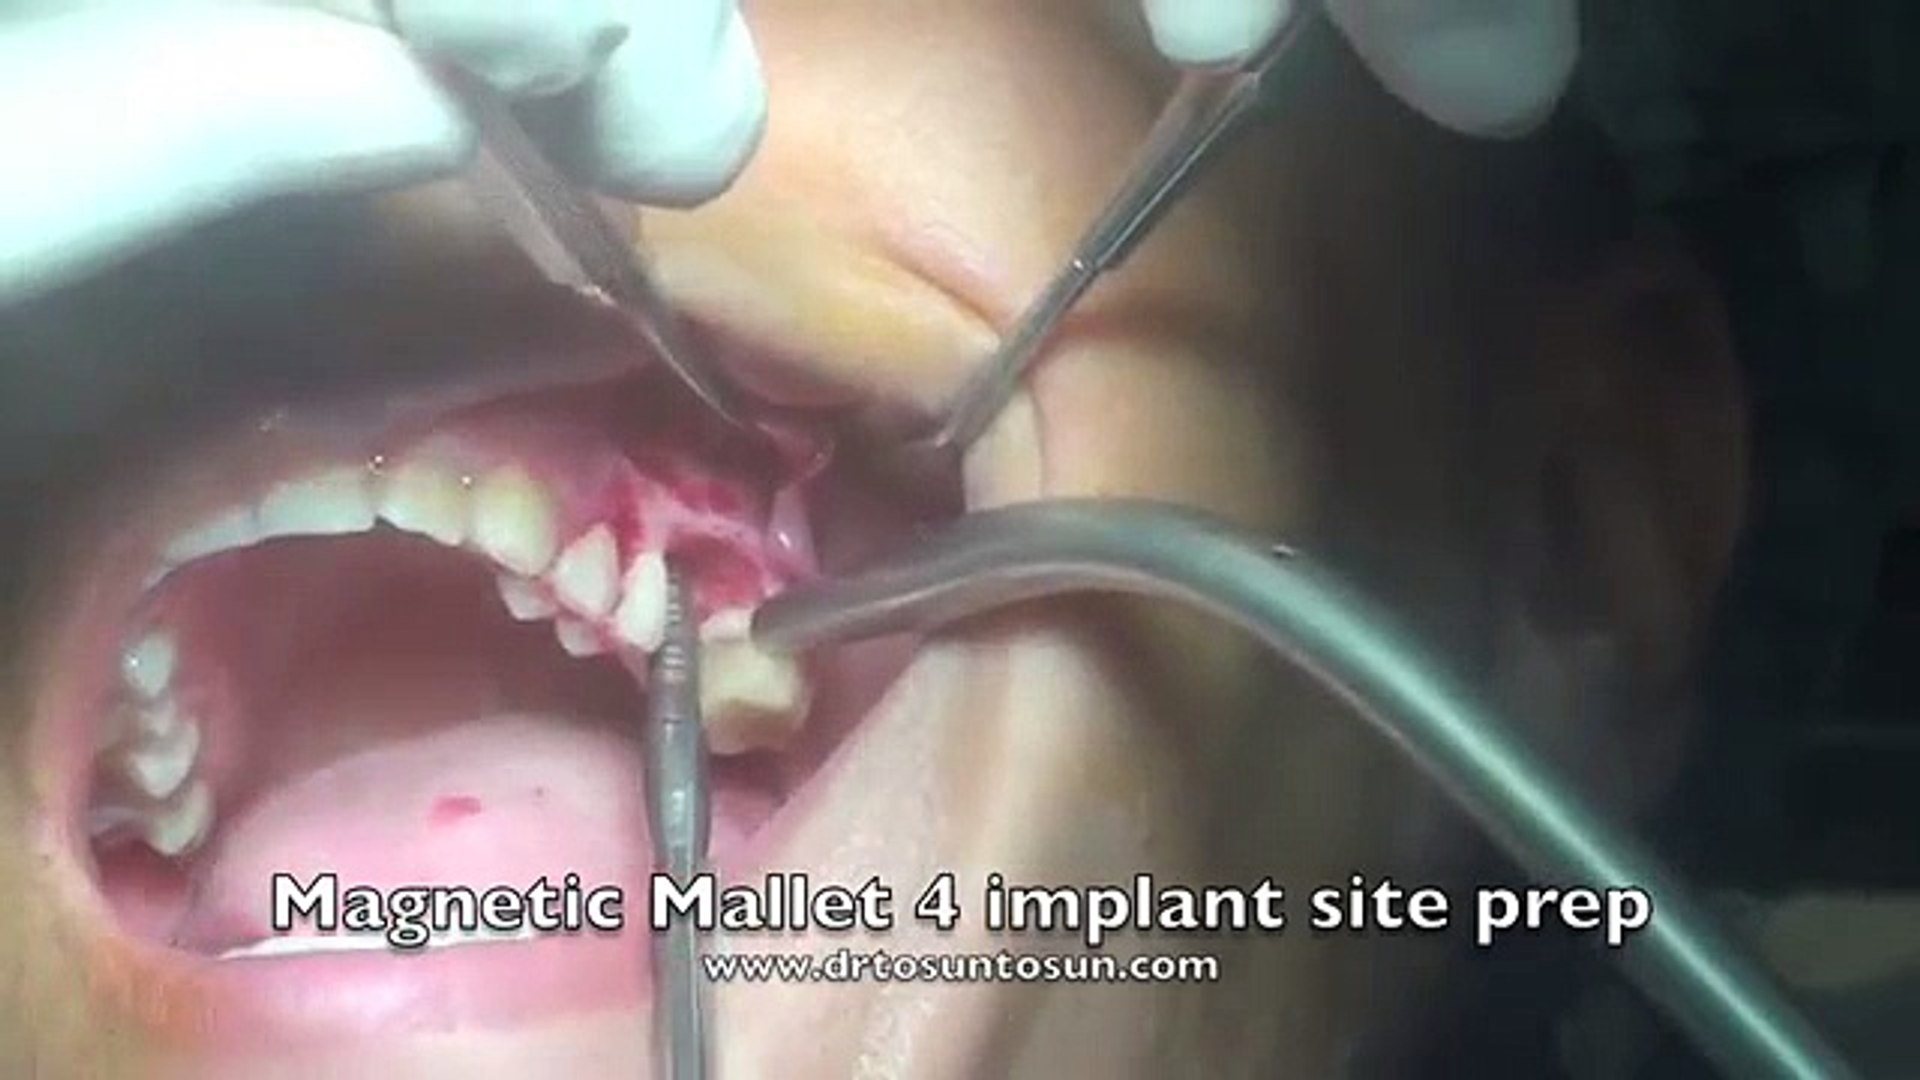 Magnetic Mallet for simultaneous sinus lift by PRF and implant placement -  video Dailymotion